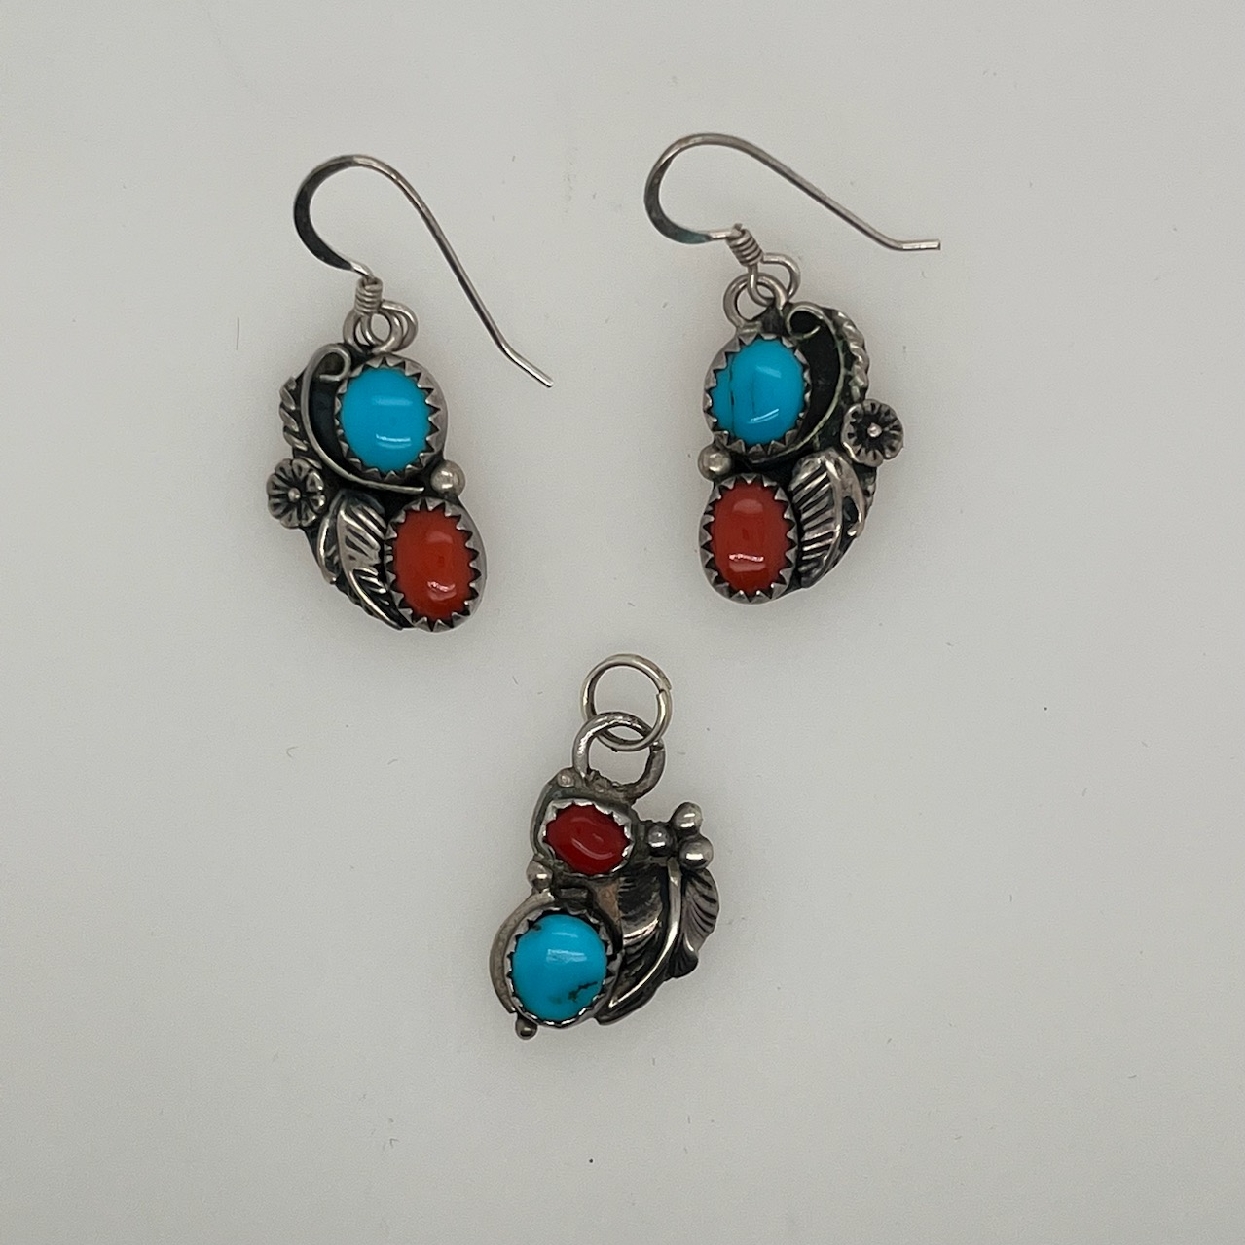 Sterling Silver Navajo Necklace and Earring Set with Bezel Set Turquoise and Coral. Stamped with Makers Mark PH